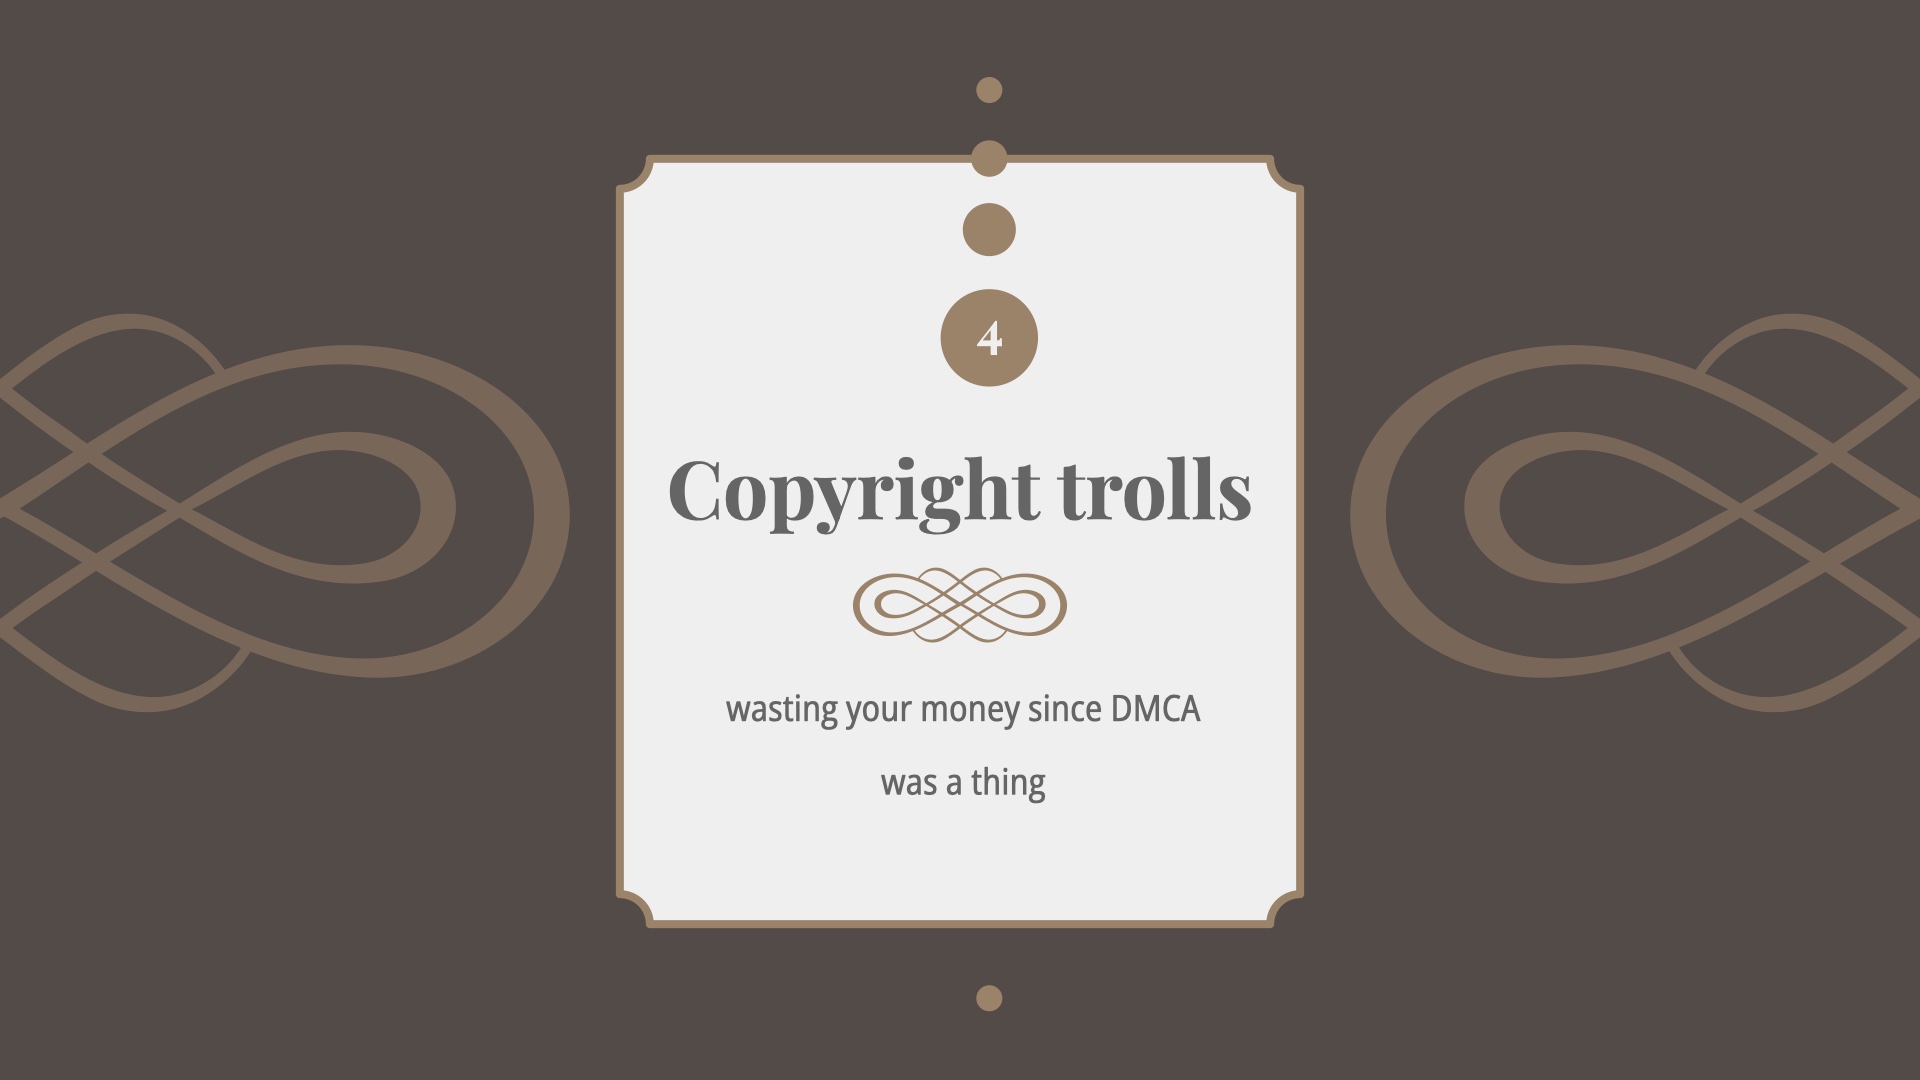 Title Card 4: Copyright trolls wasting your money since DMCA was a thing